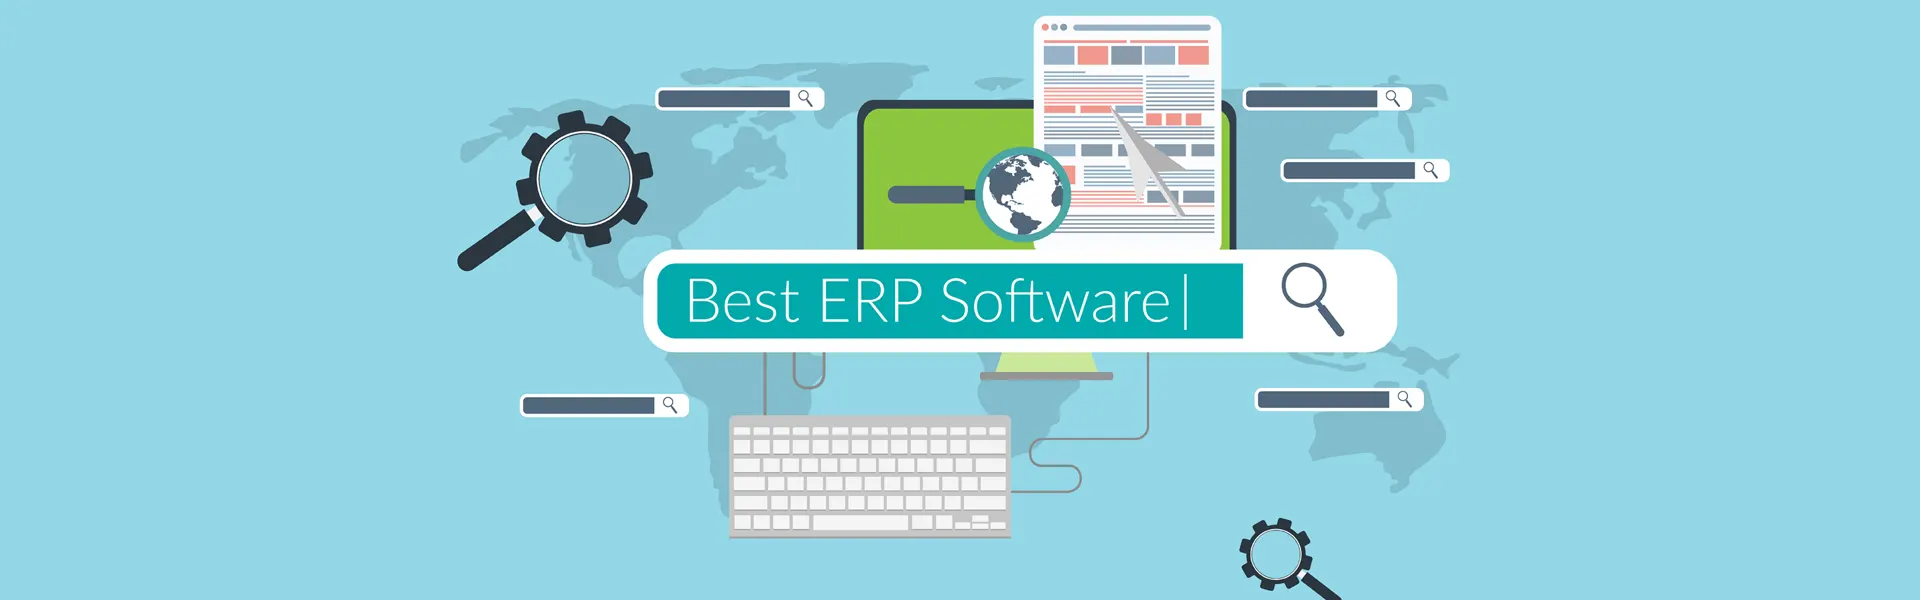 Make the Right Choice – Select the Best ERP Software